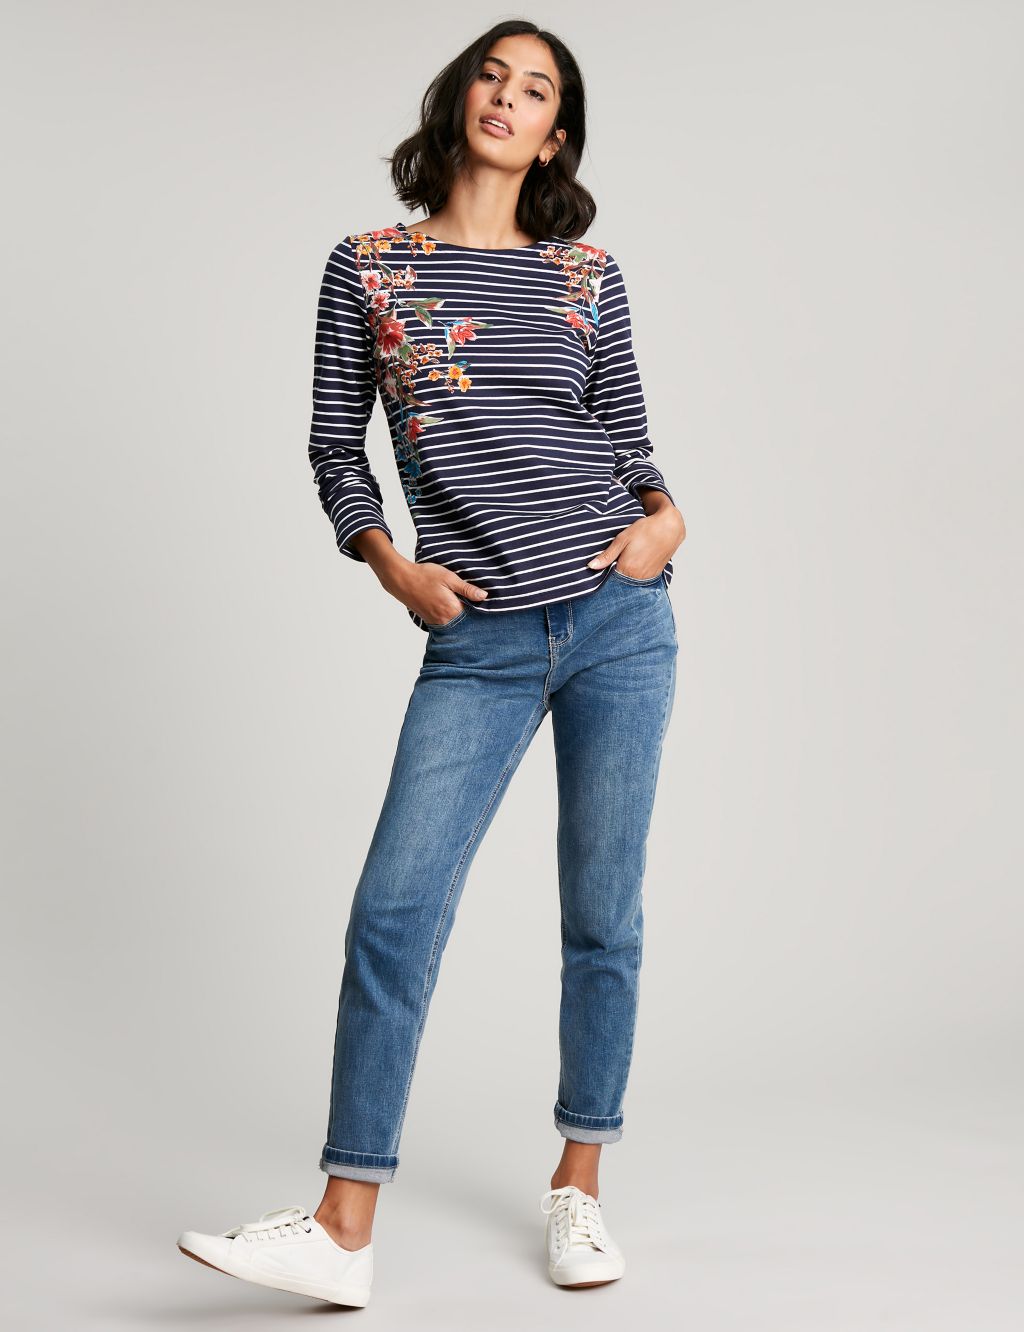 Harbour Print- Long Sleeve Jersey Top image 1